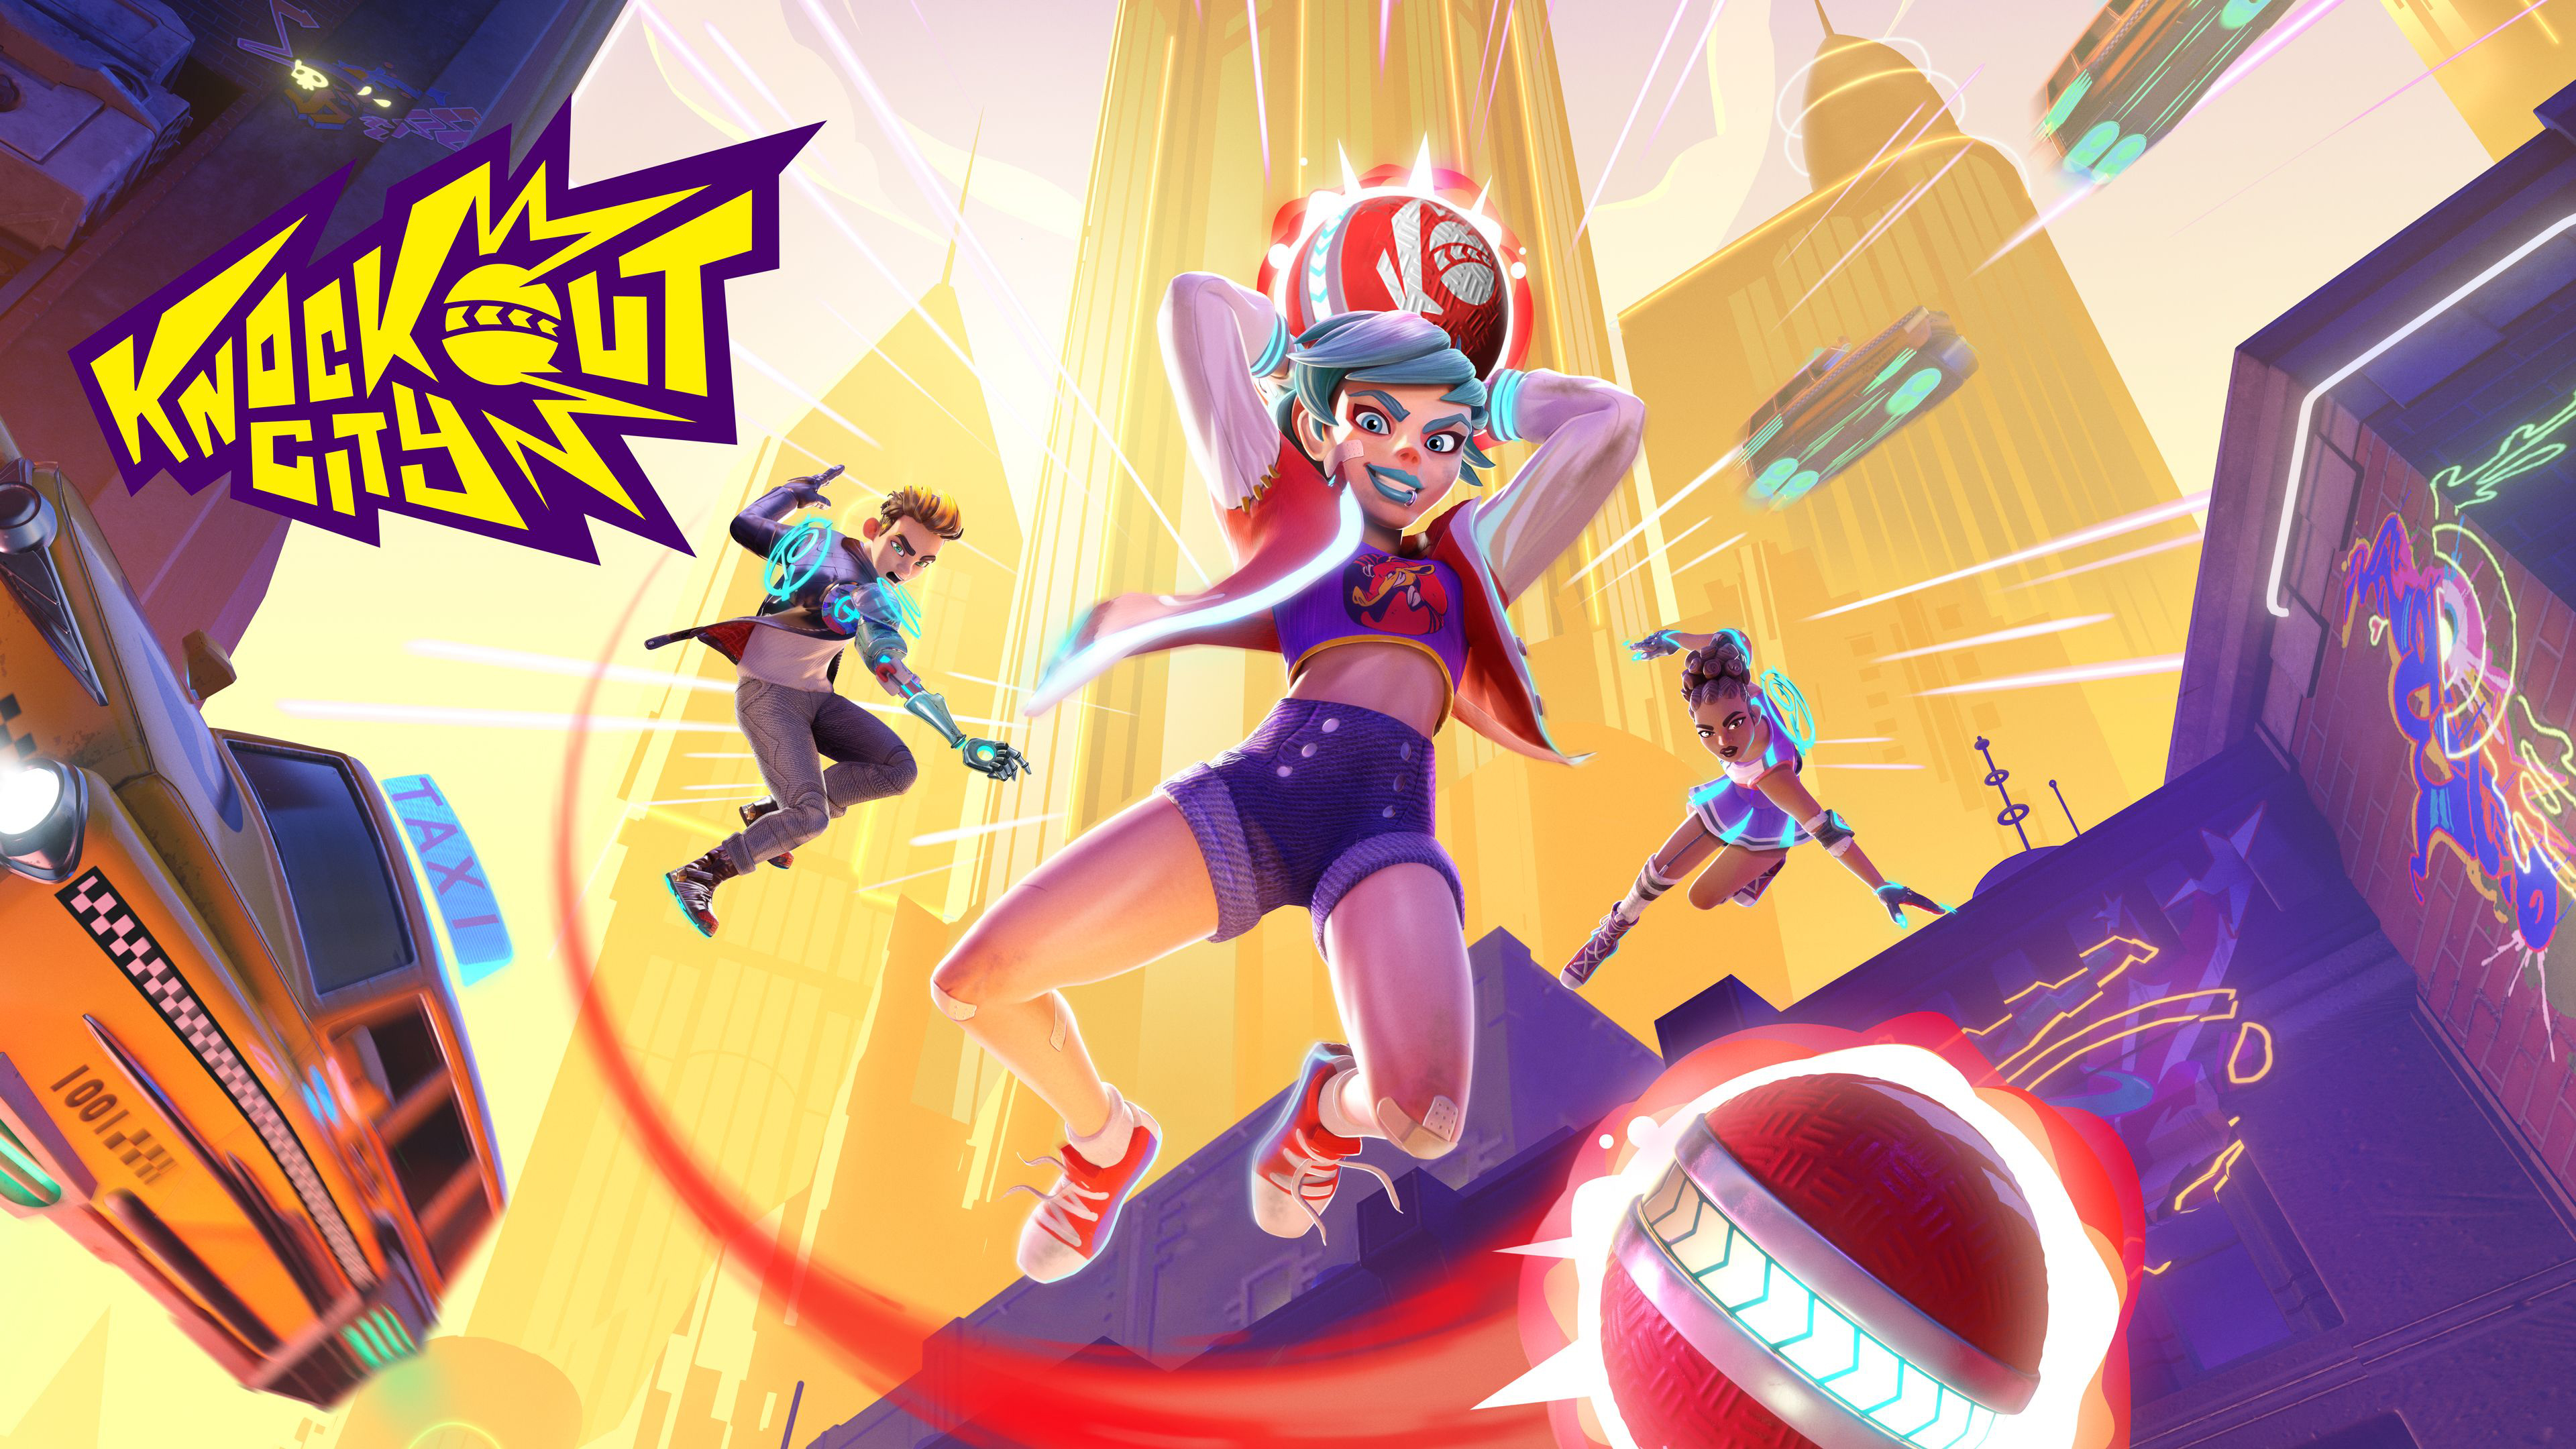 EA and Velan Studios' Dodgeball-Inspired Team-Based Multiplayer Game,  Knockout City, Launches Today | Business Wire